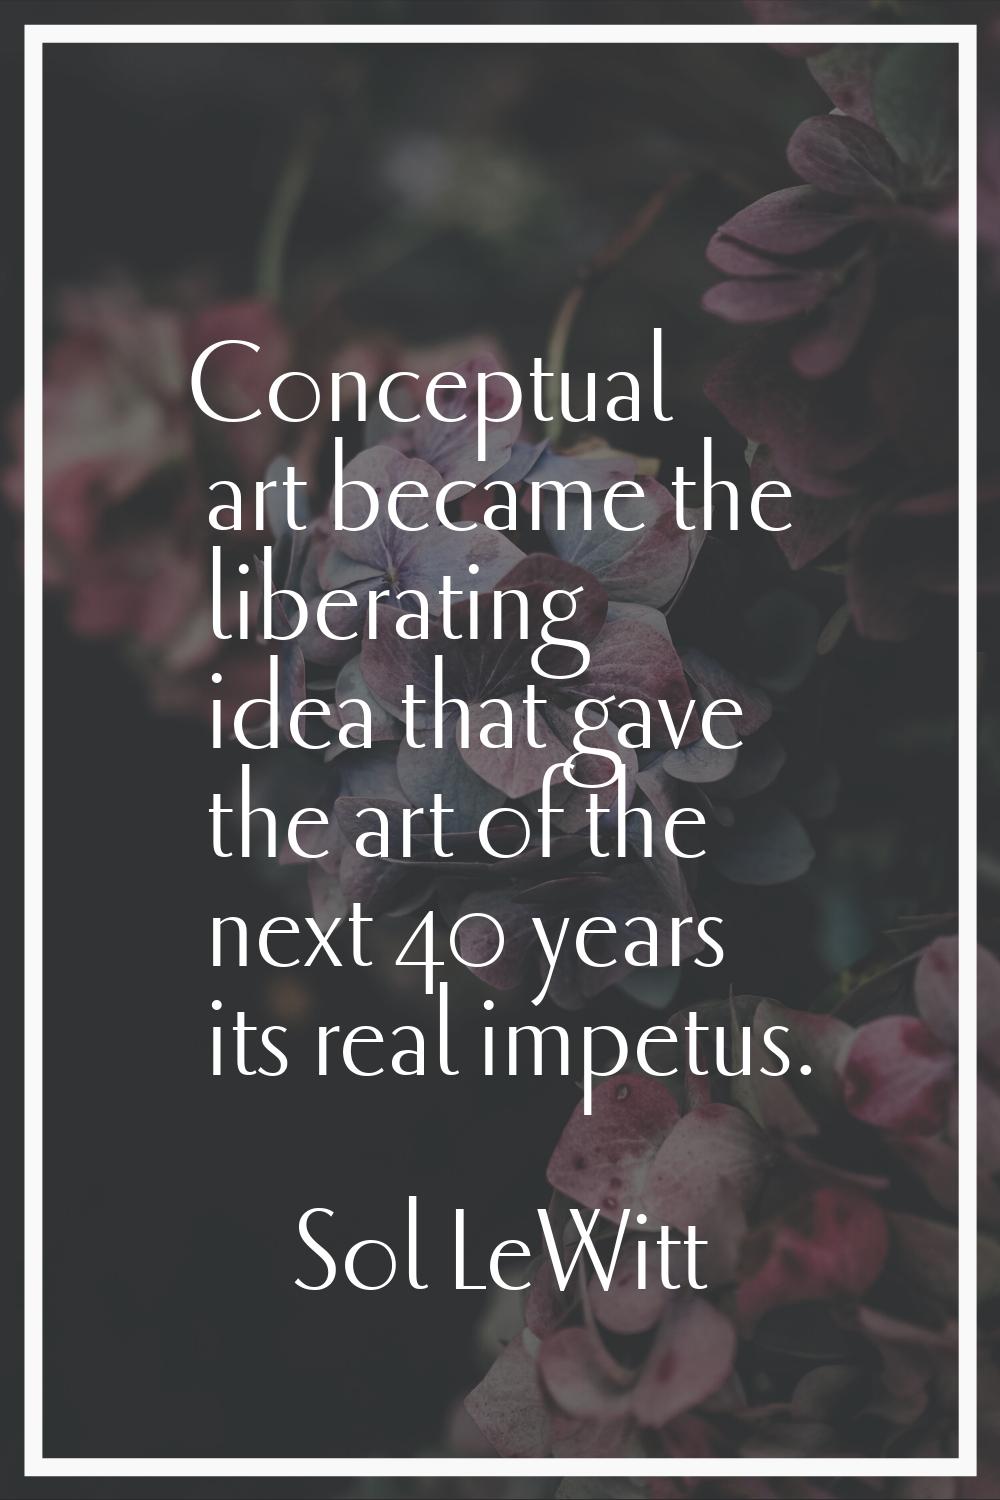 Conceptual art became the liberating idea that gave the art of the next 40 years its real impetus.